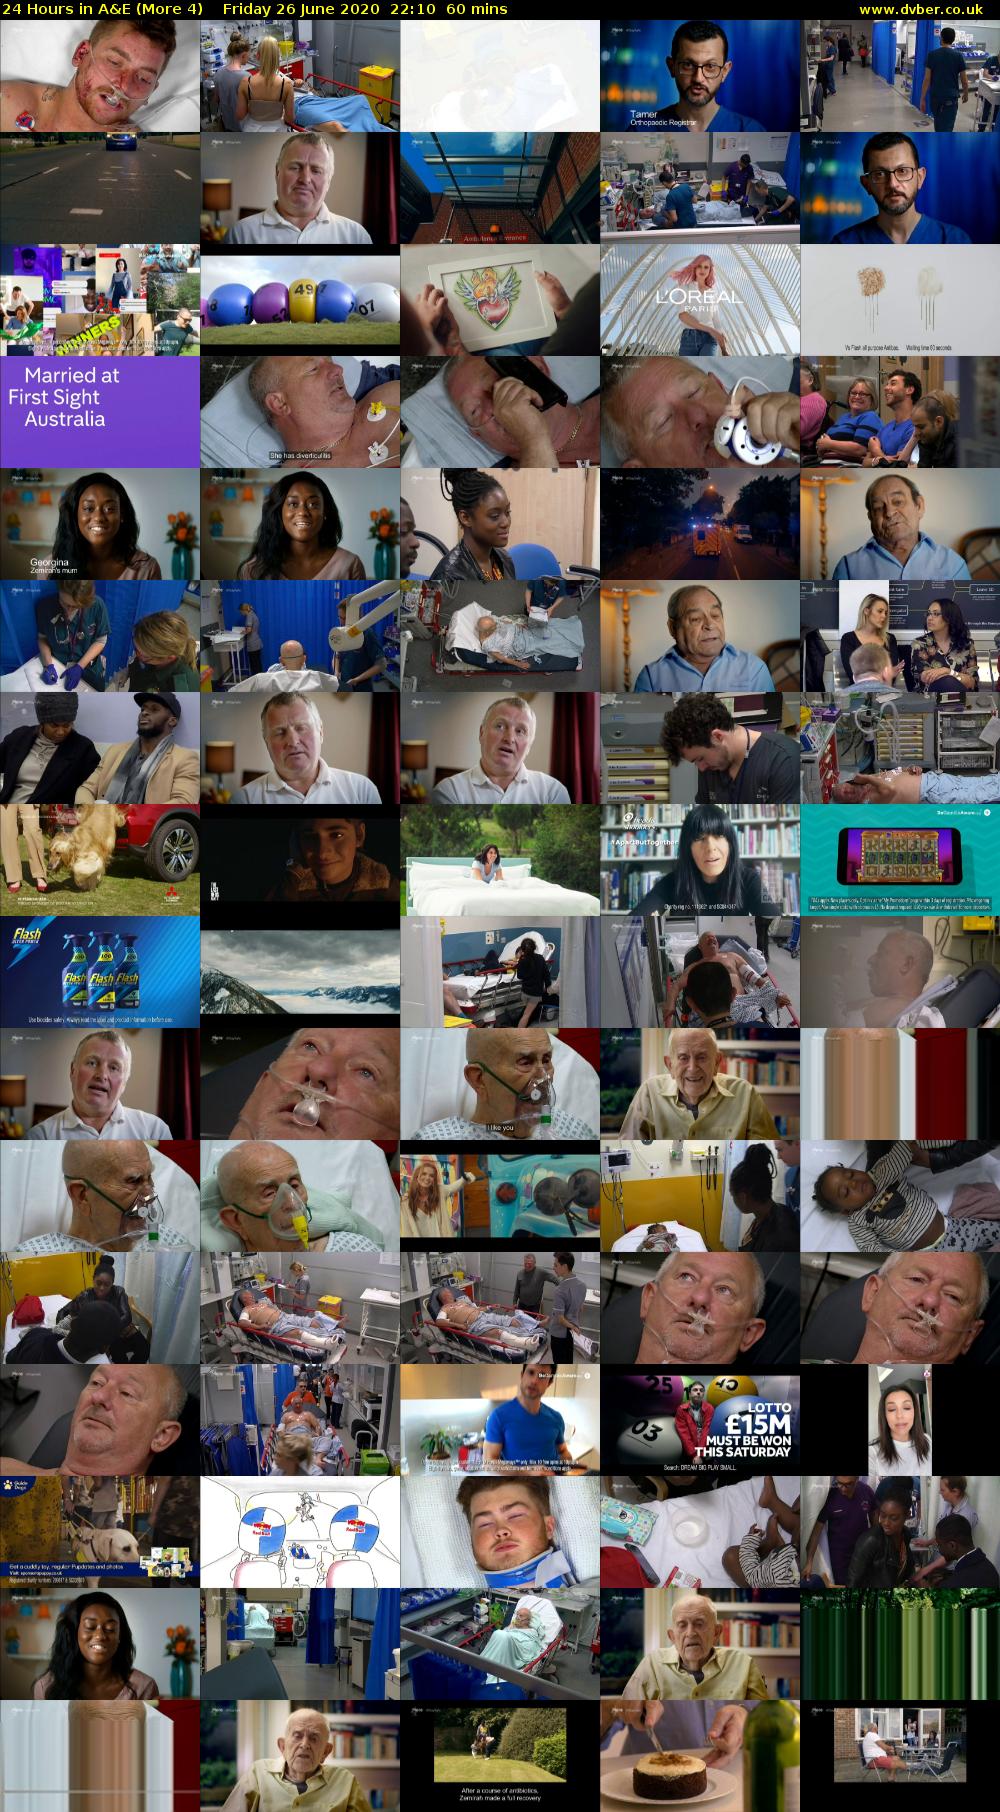 24 Hours in A&E (More 4) Friday 26 June 2020 22:10 - 23:10